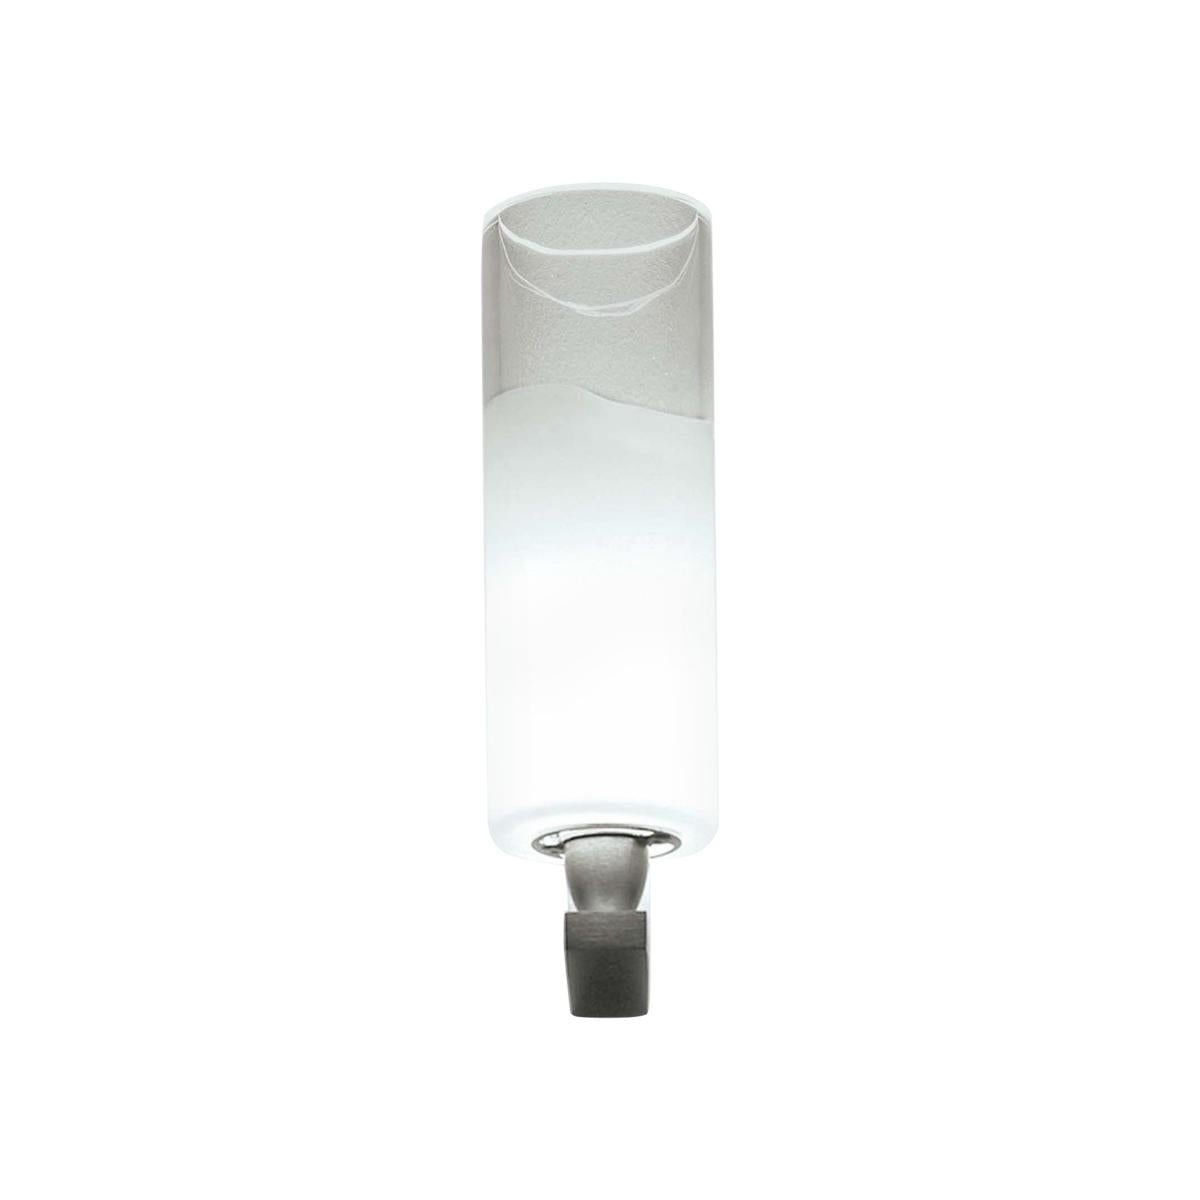 Lio AP L1 P Wall Light in Crystal White by Vistosi For Sale